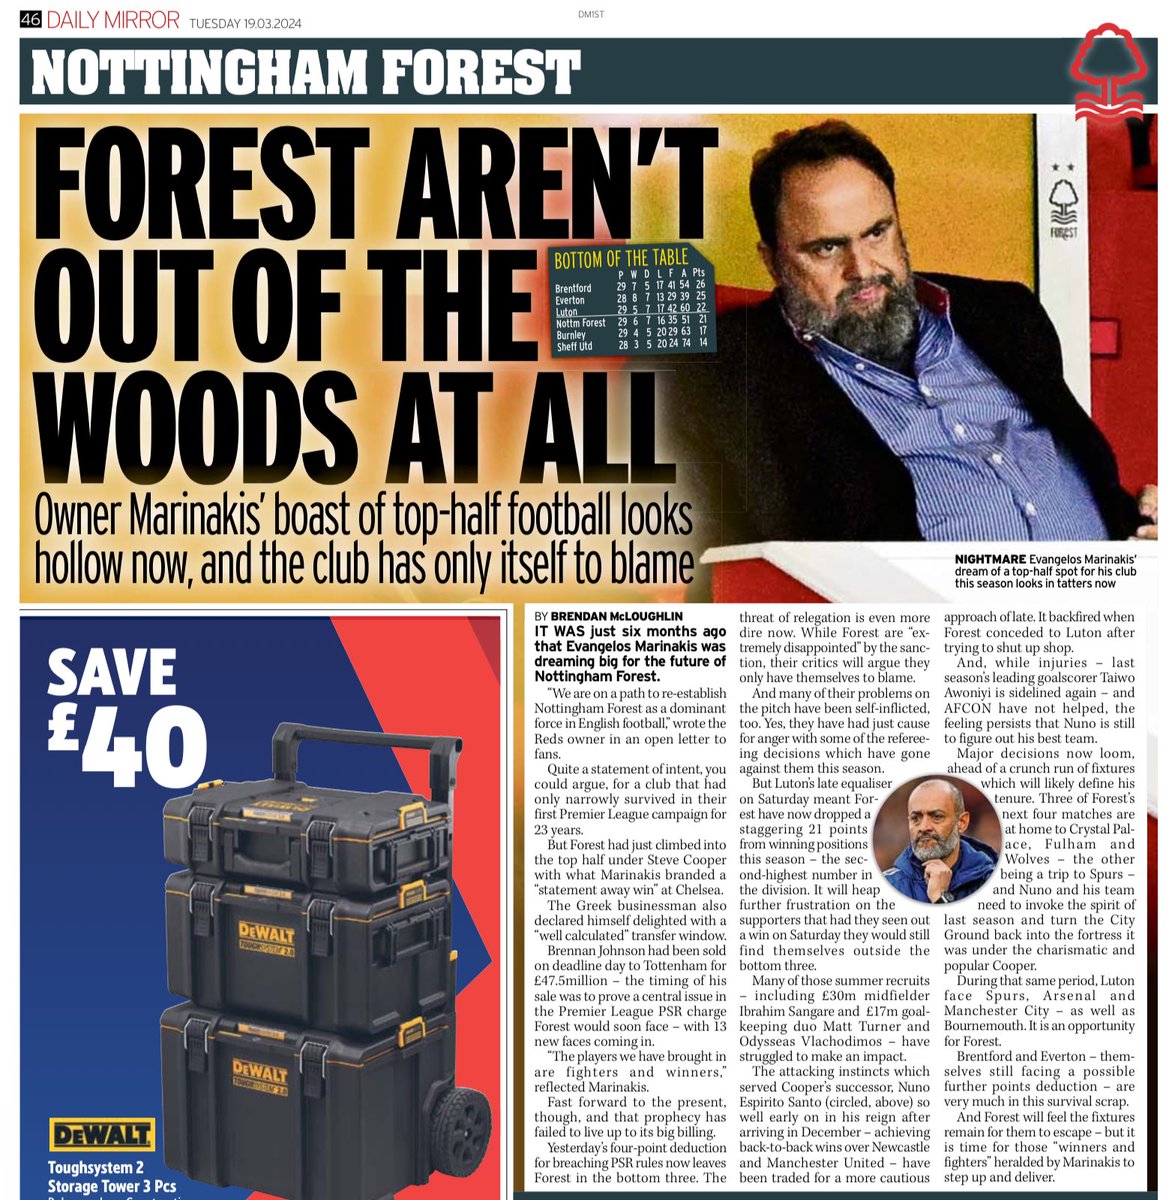 Six months ago Evangelos Marinakis said #nffc are “on a path to re-establish (club) as a dominant force in English football.” Now they find themselves in the bottom three. @MirrorFootball piece on how a season which promised much has unravelled into another survival battle.